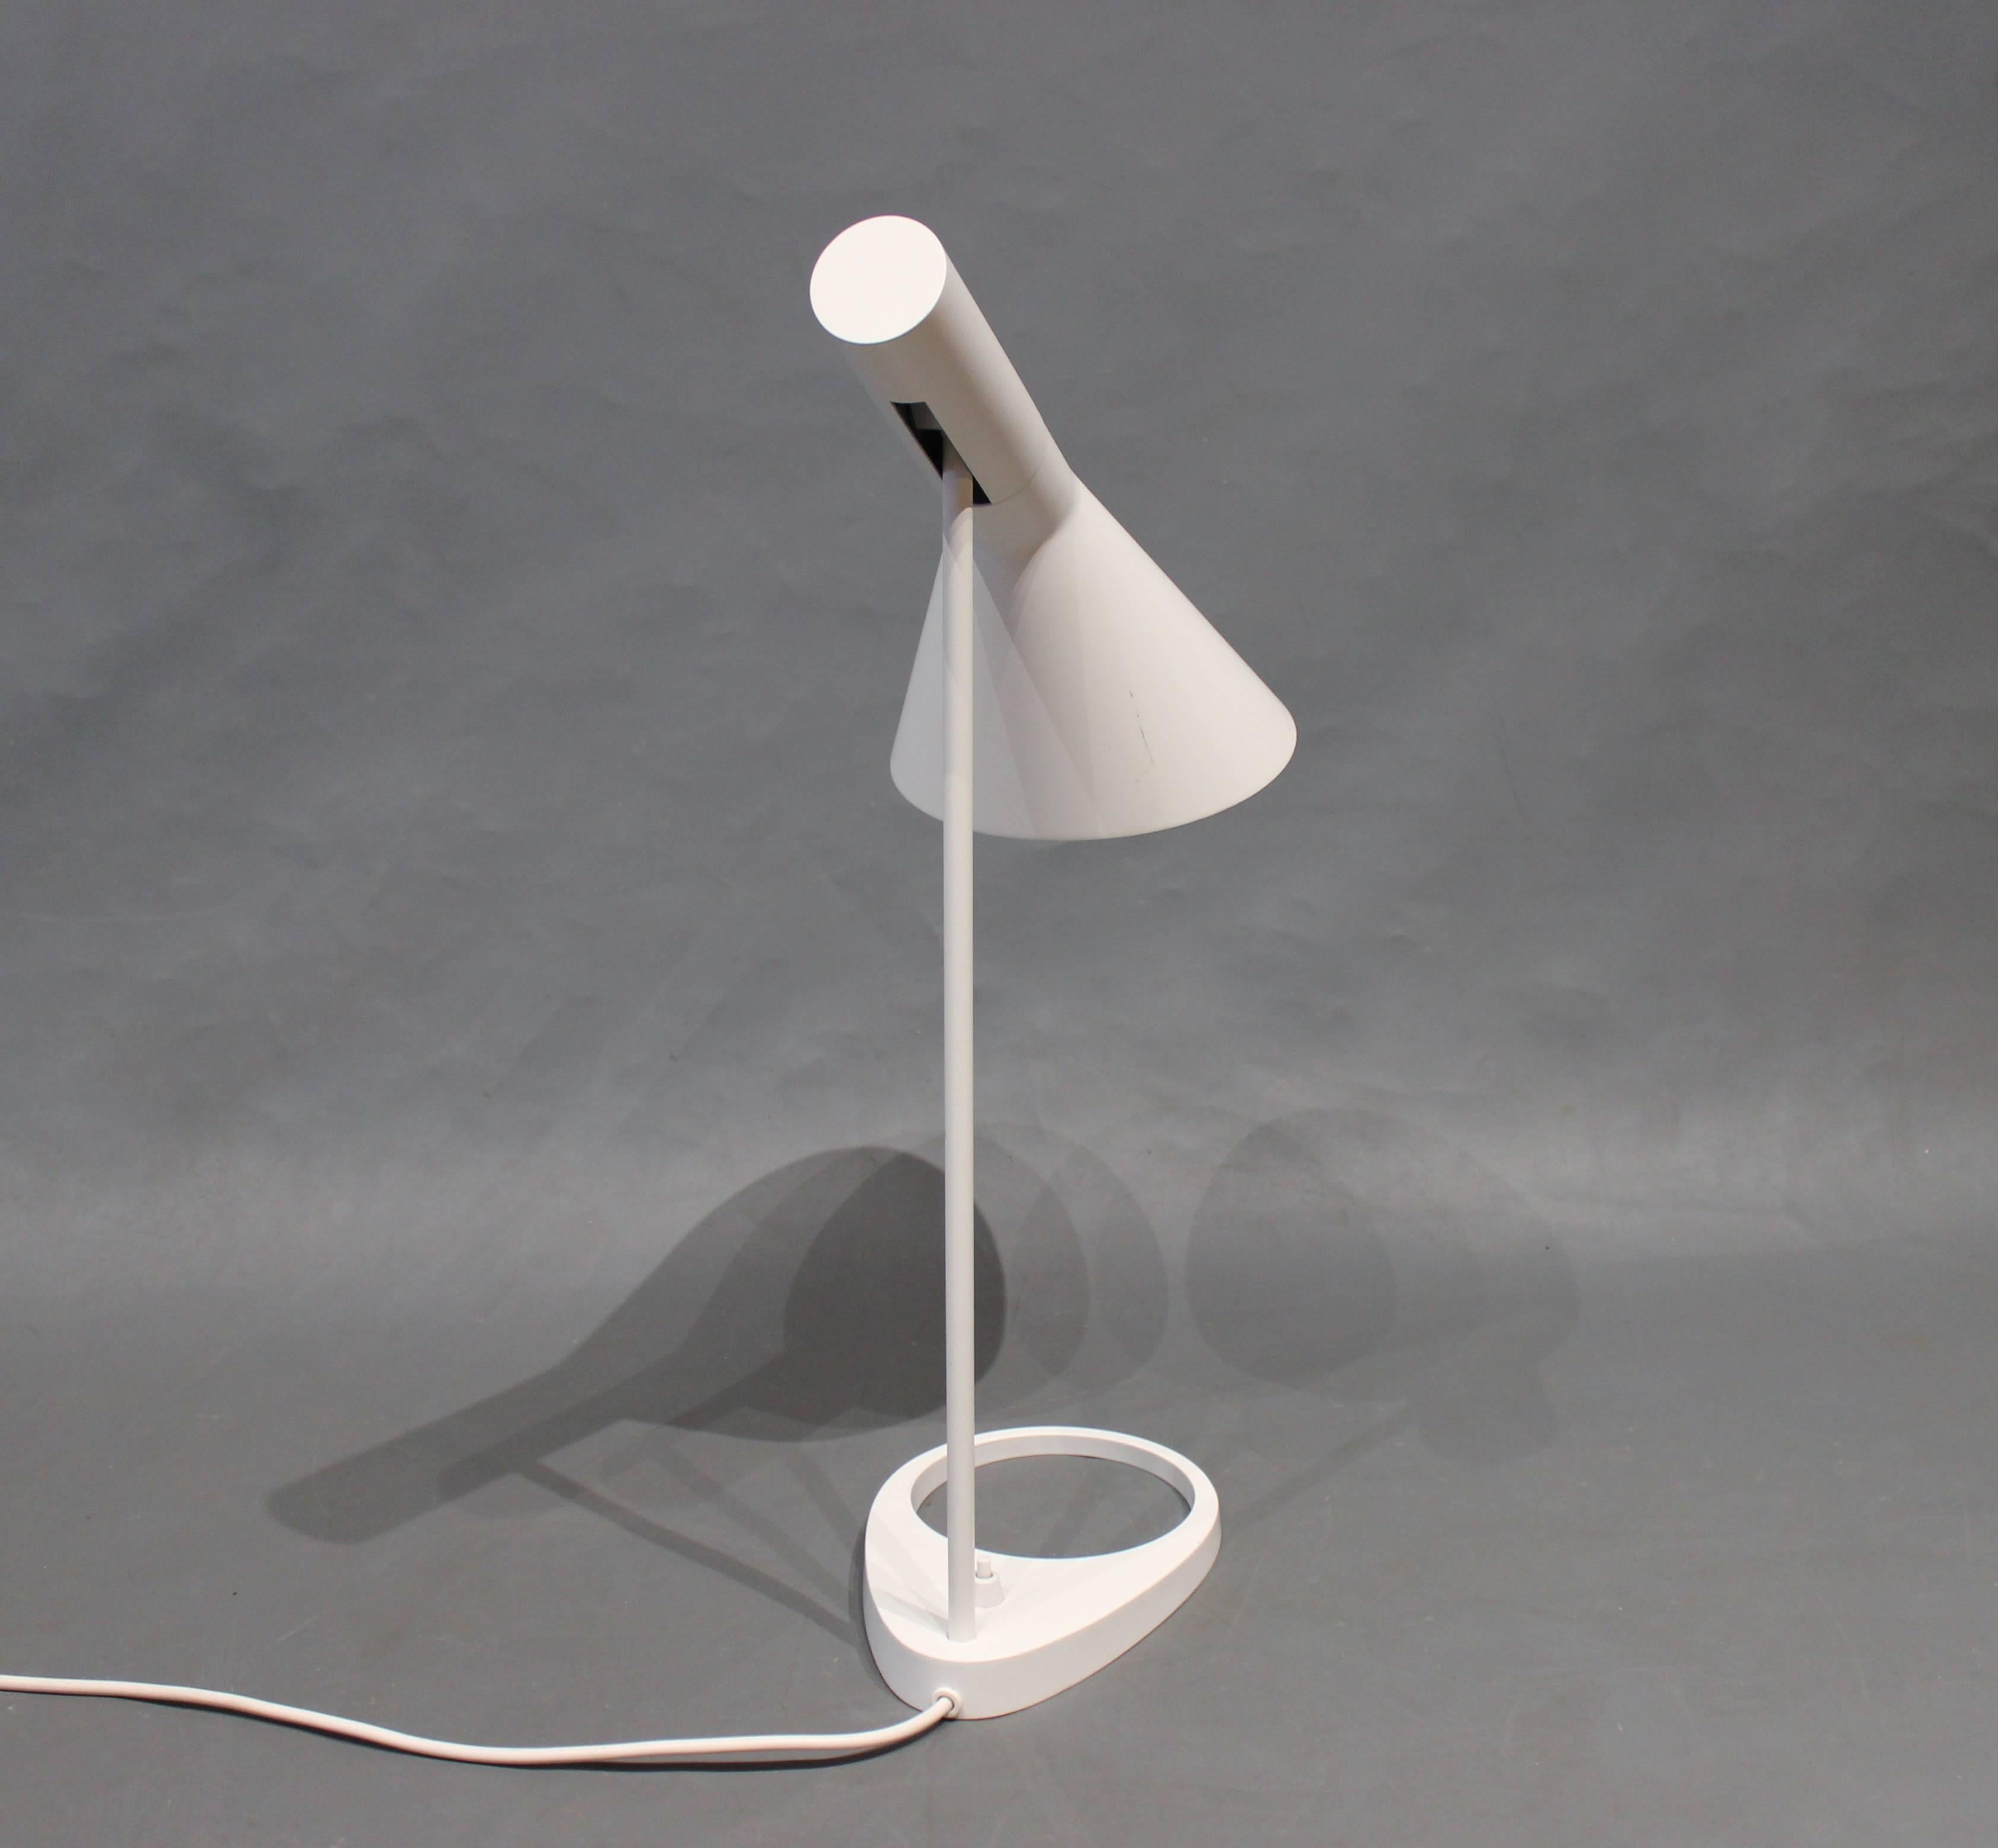 Painted Arne Jacobsen, White Table Lamp, Designed in 1960 and by Louis Poulsen